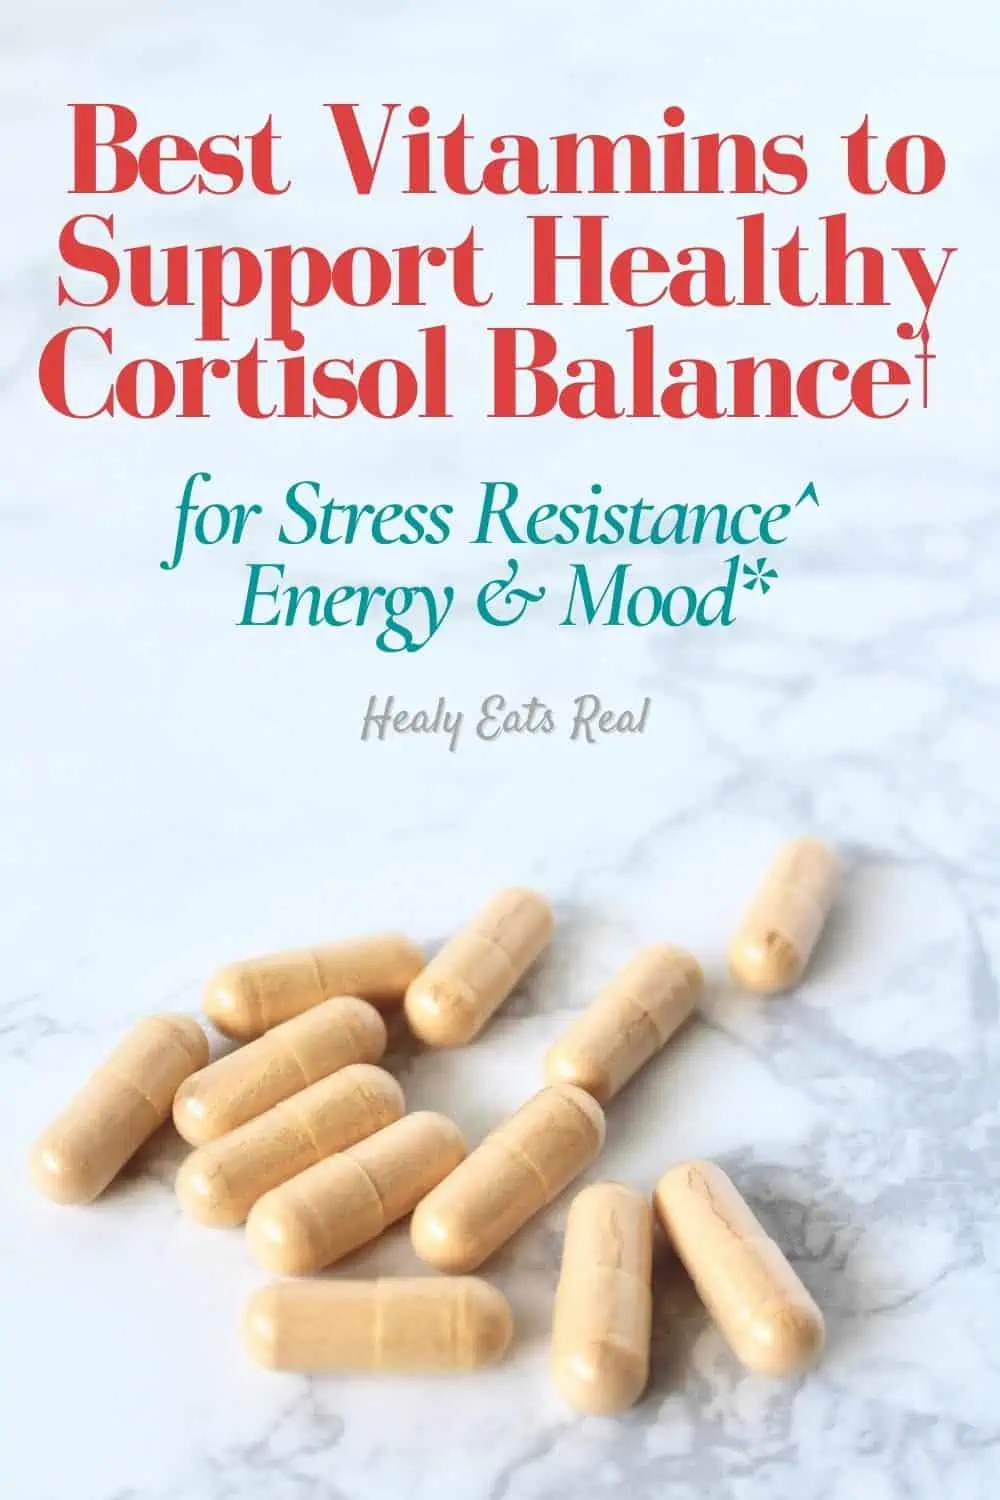 Best Vitamins to Support Healthy Cortisol Balance† for Stress Resistance^, Energy & Mood*